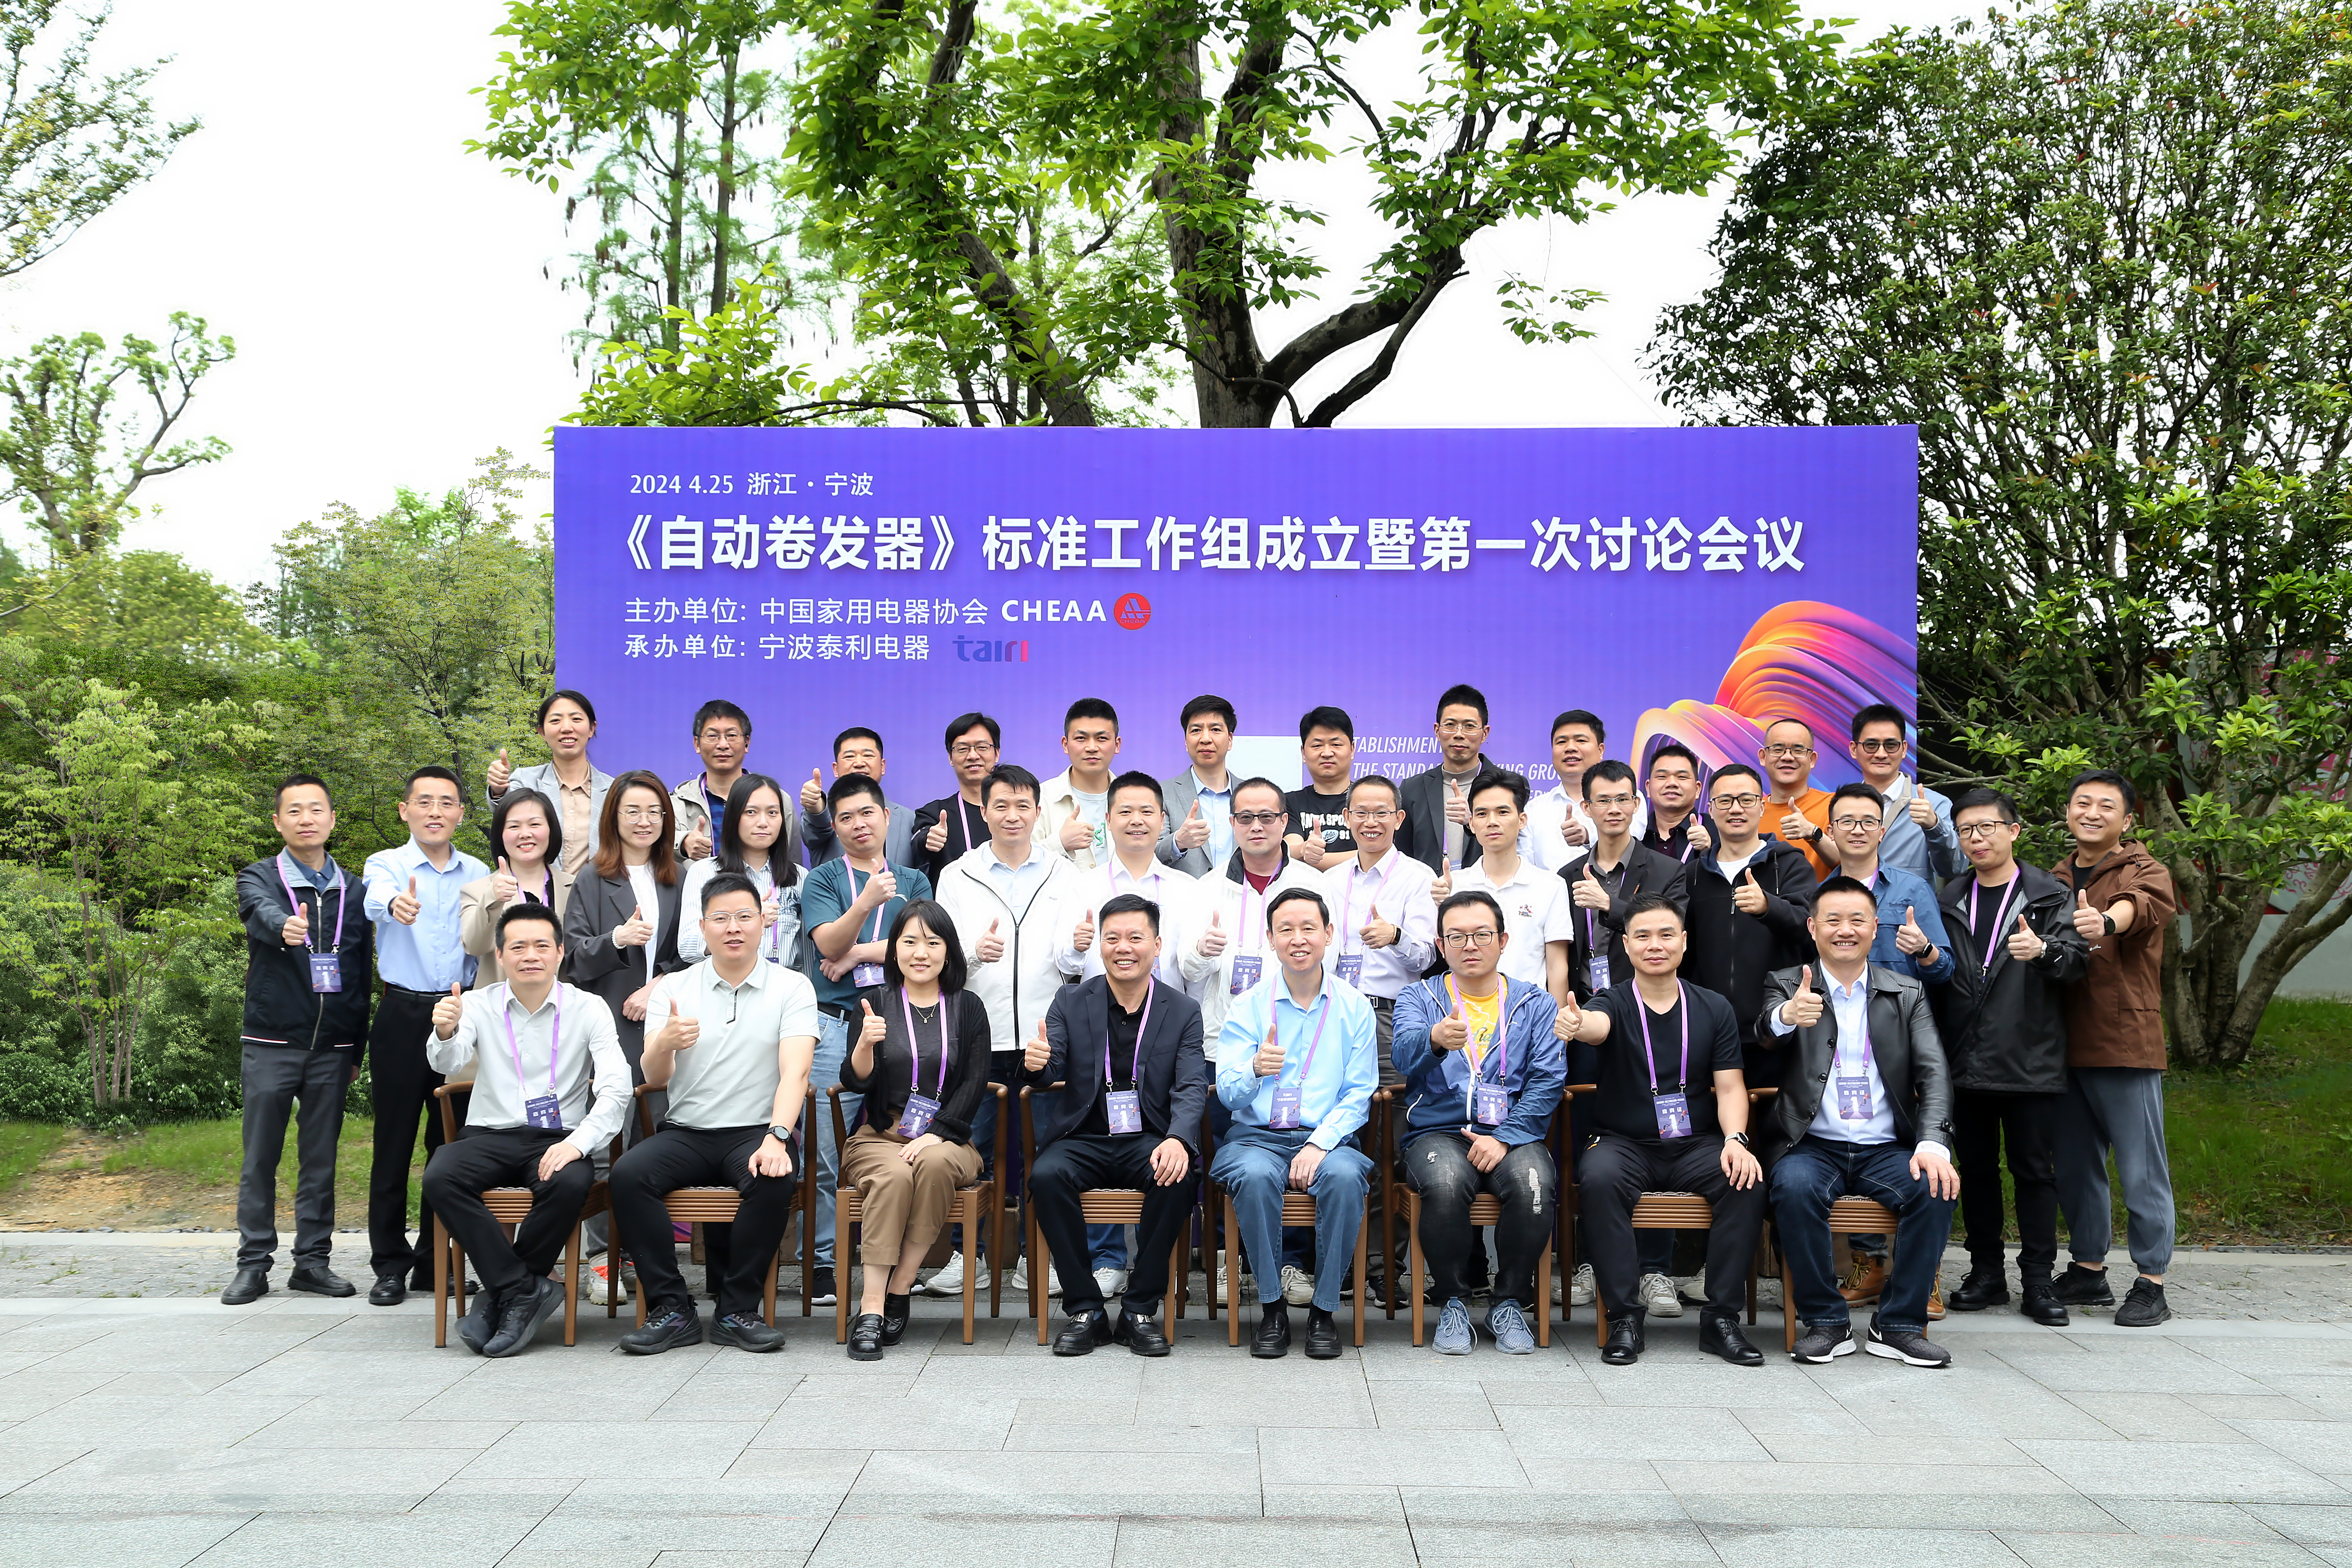 Xiaoqiang Technology was invited to establish an automatic hair curling iron standard working group. The working group held its first discussion meeting to start the standard drafting process and disc